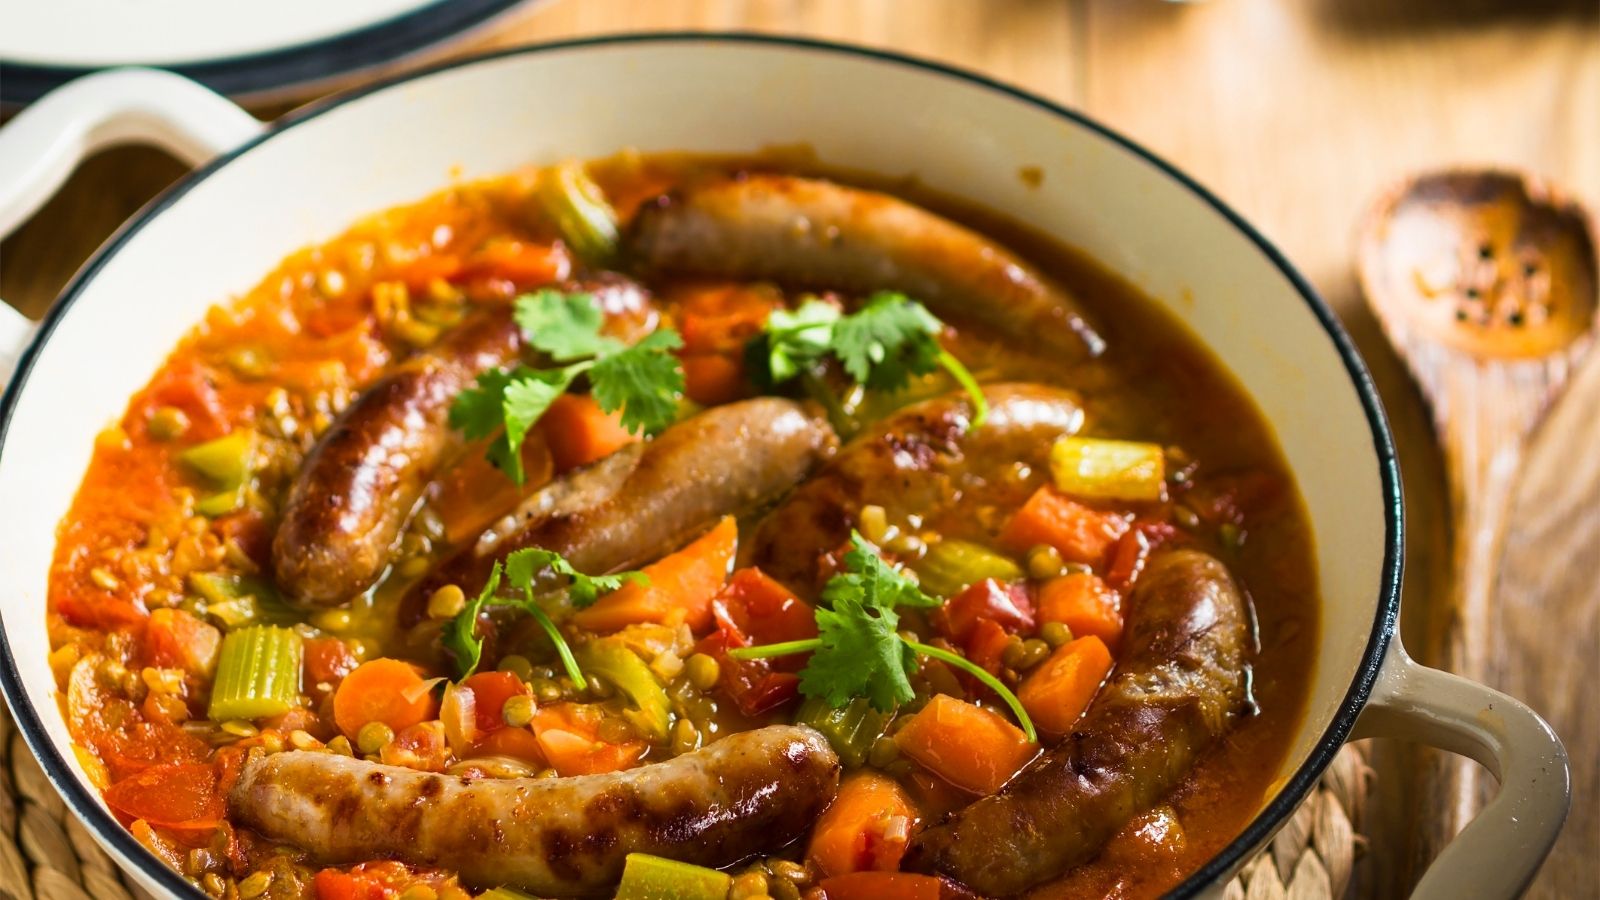 Image of a slow cooker sausage casserole recipe